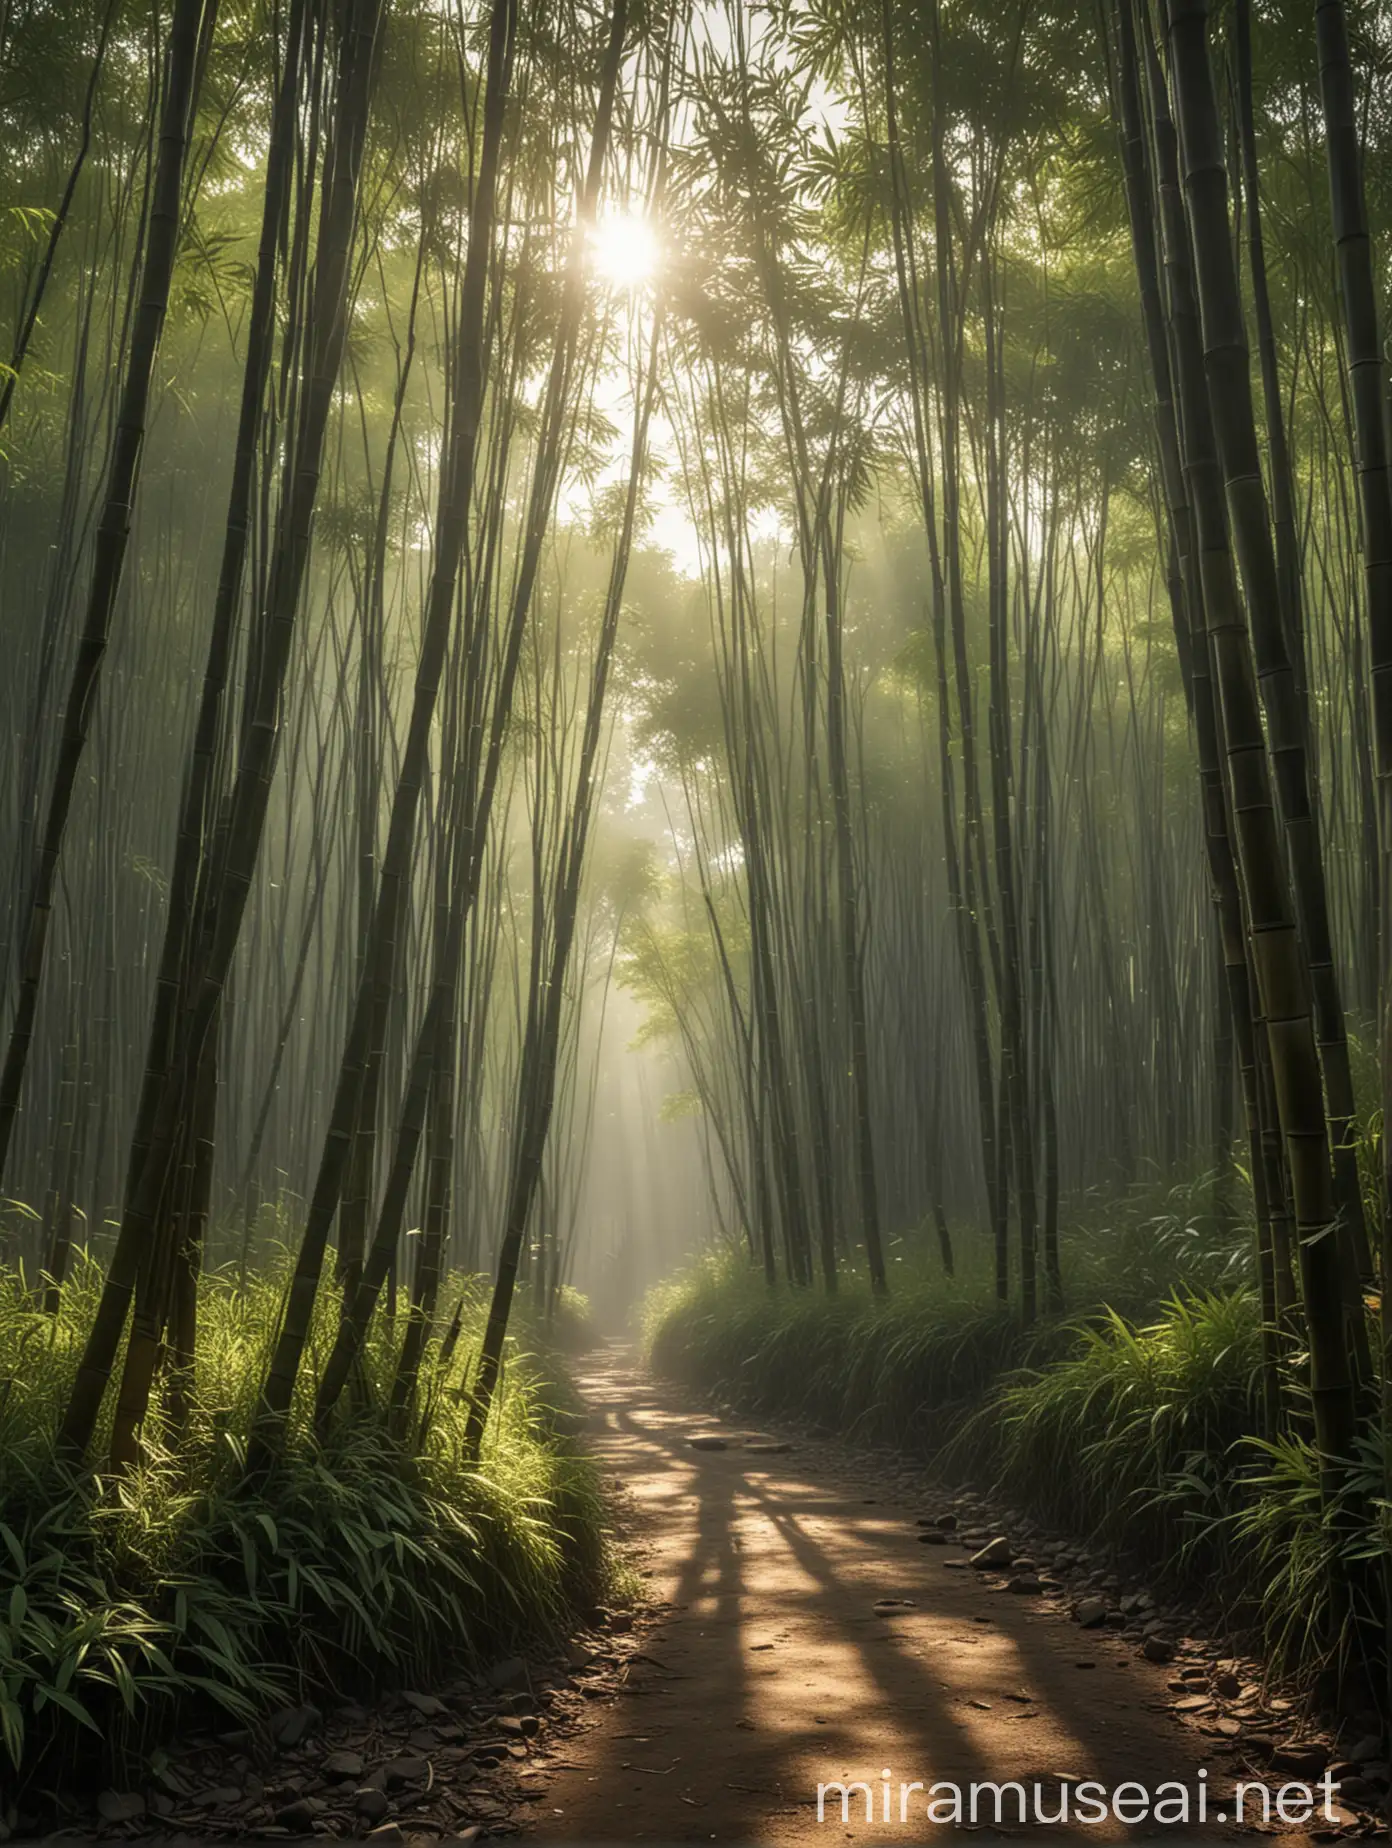 Realistic Morning Atmosphere in Indonesian Village with Sunlight Filtering Through Bamboo Trees 8K